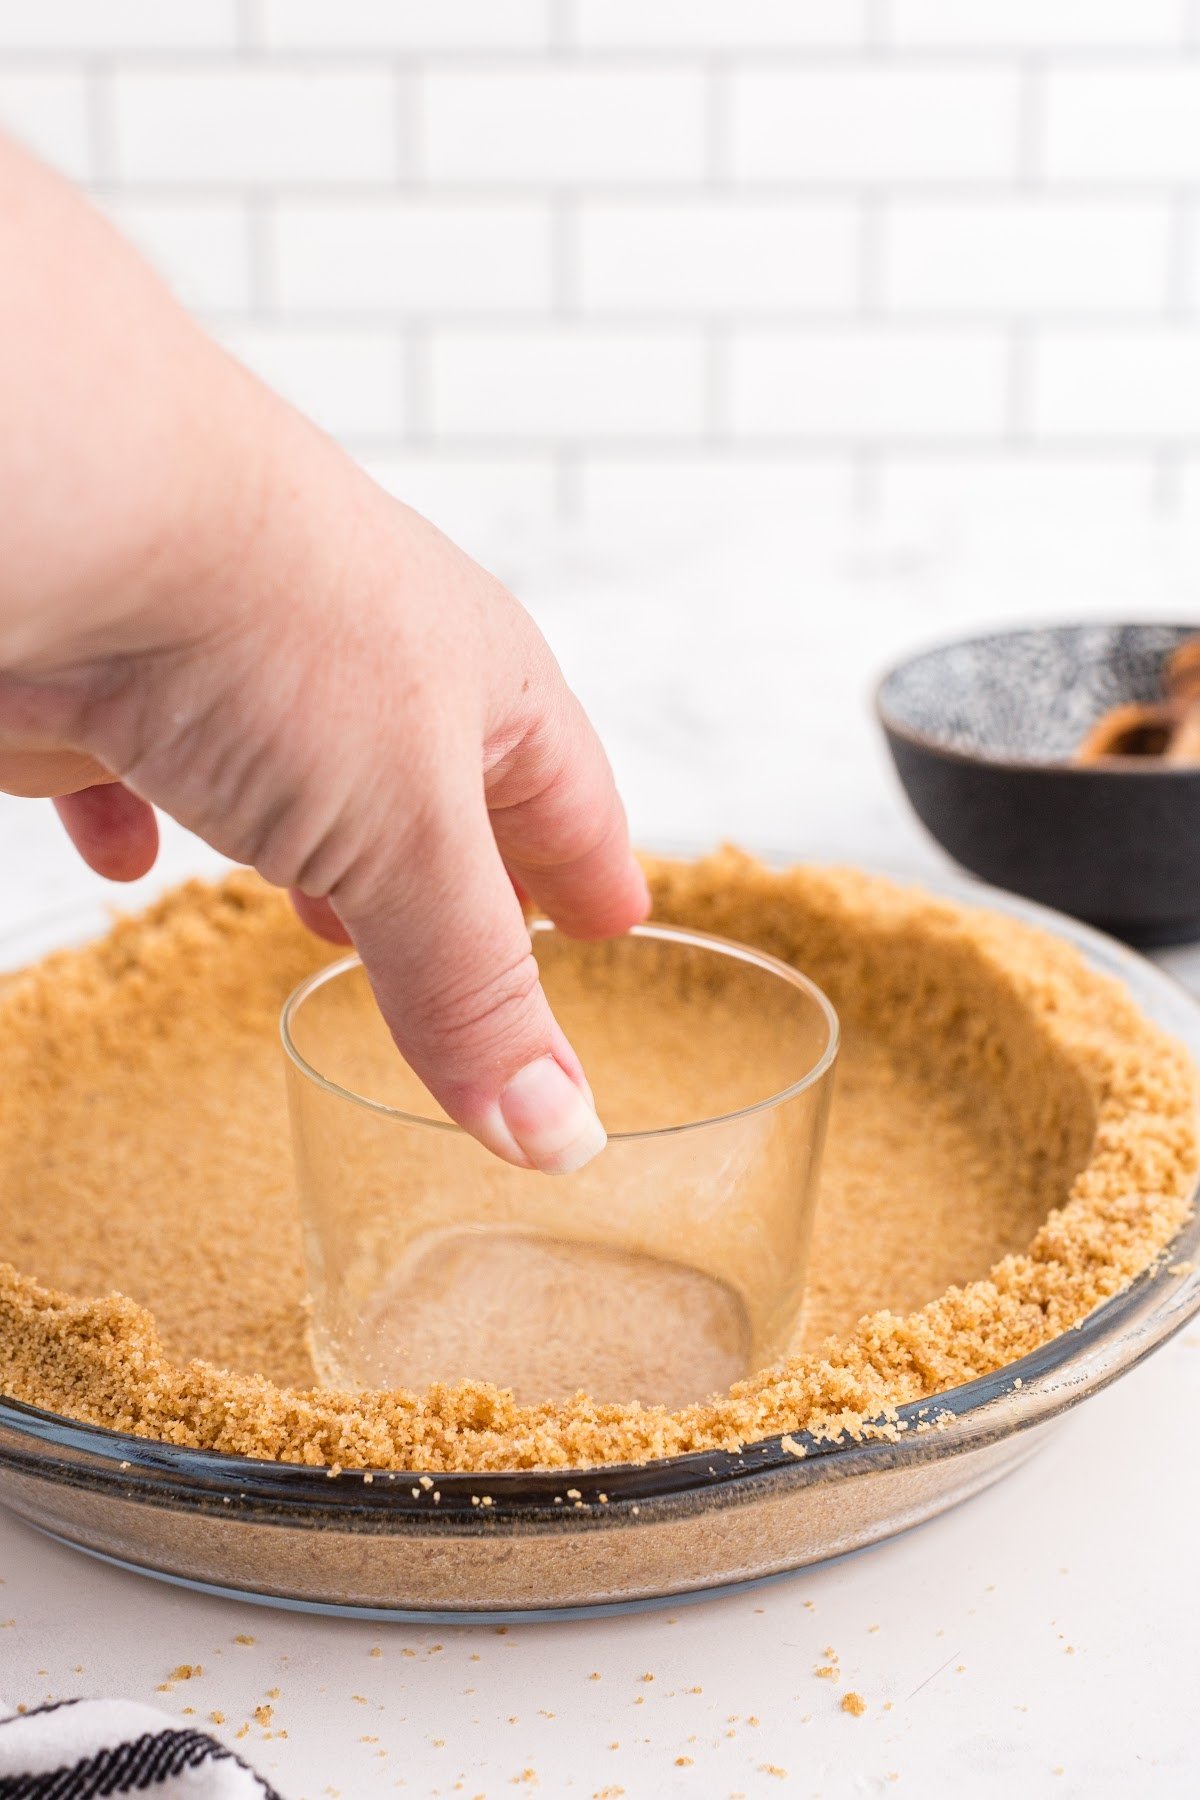 Pressing the graham cracker mixture into a pie plate.